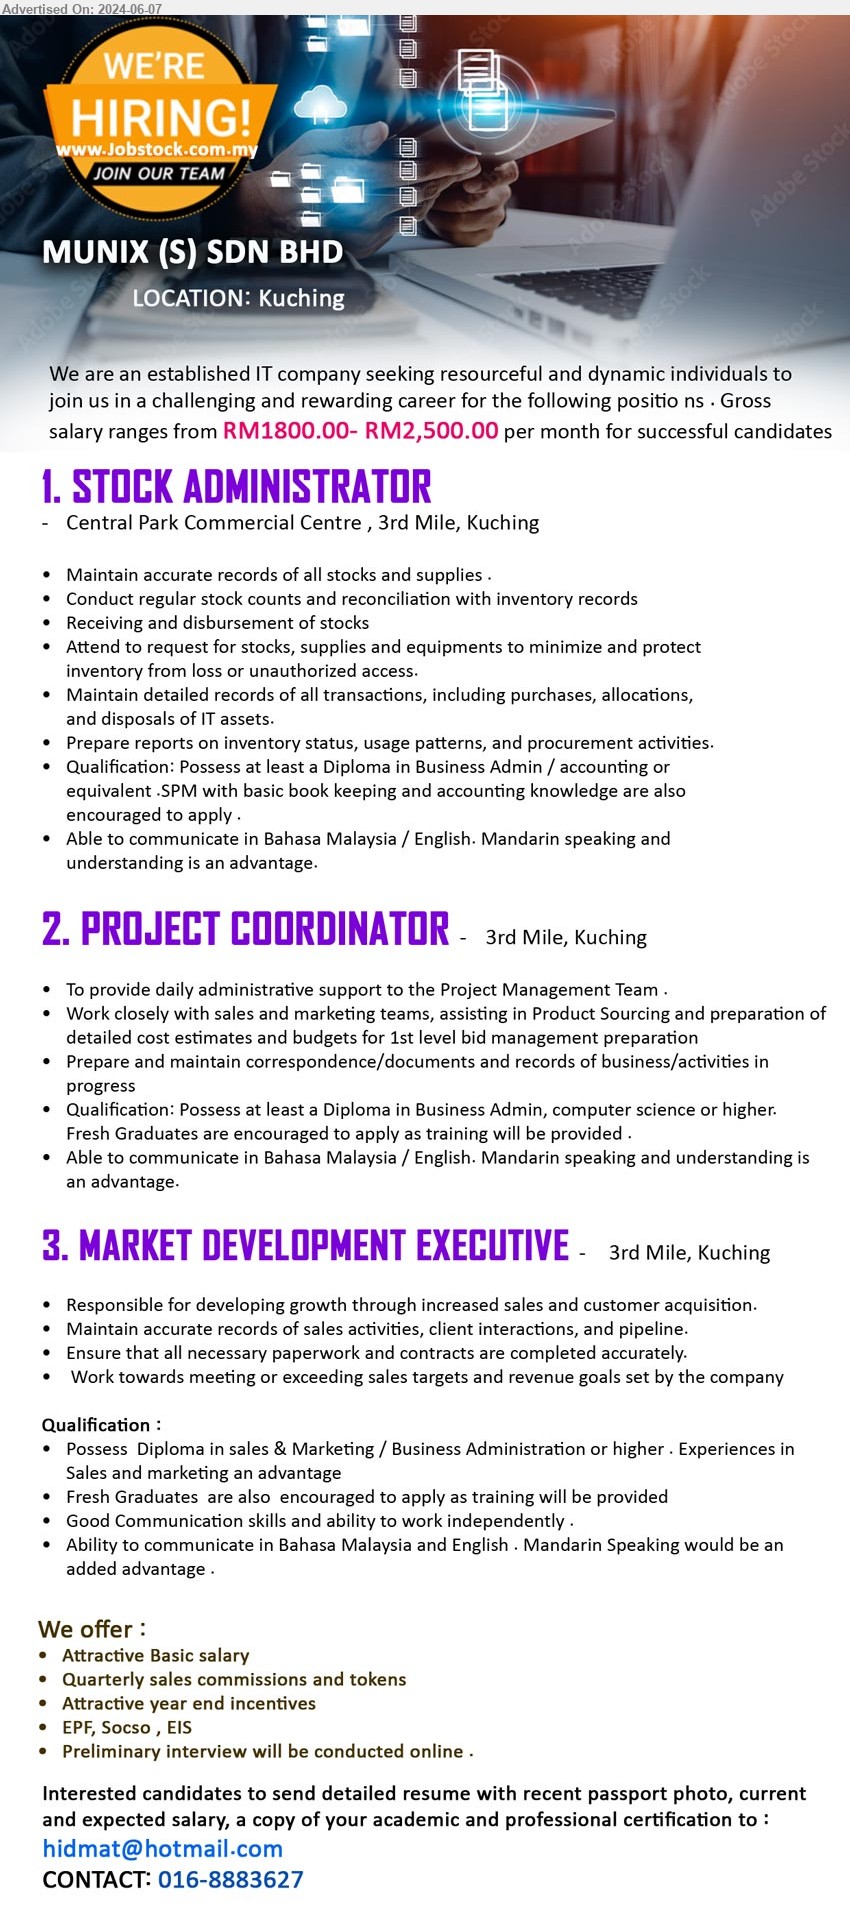 MUNIX (S) SDN BHD - 1. STOCK ADMINISTRATOR (Kuching),  Diploma in Business Admin / Accounting, SPM with basic book keeping and accounting knowledge are also encouraged to apply .,...
2. PROJECT COORDINATOR (Kuching), Diploma in Business Admin, computer science or higher.,...
3. MARKET DEVELOPMENT EXECUTIVE (Kuching), Diploma in Sales & Marketing / Business Administration or higher ,...
Call 016-8883627 / Email resume to ...